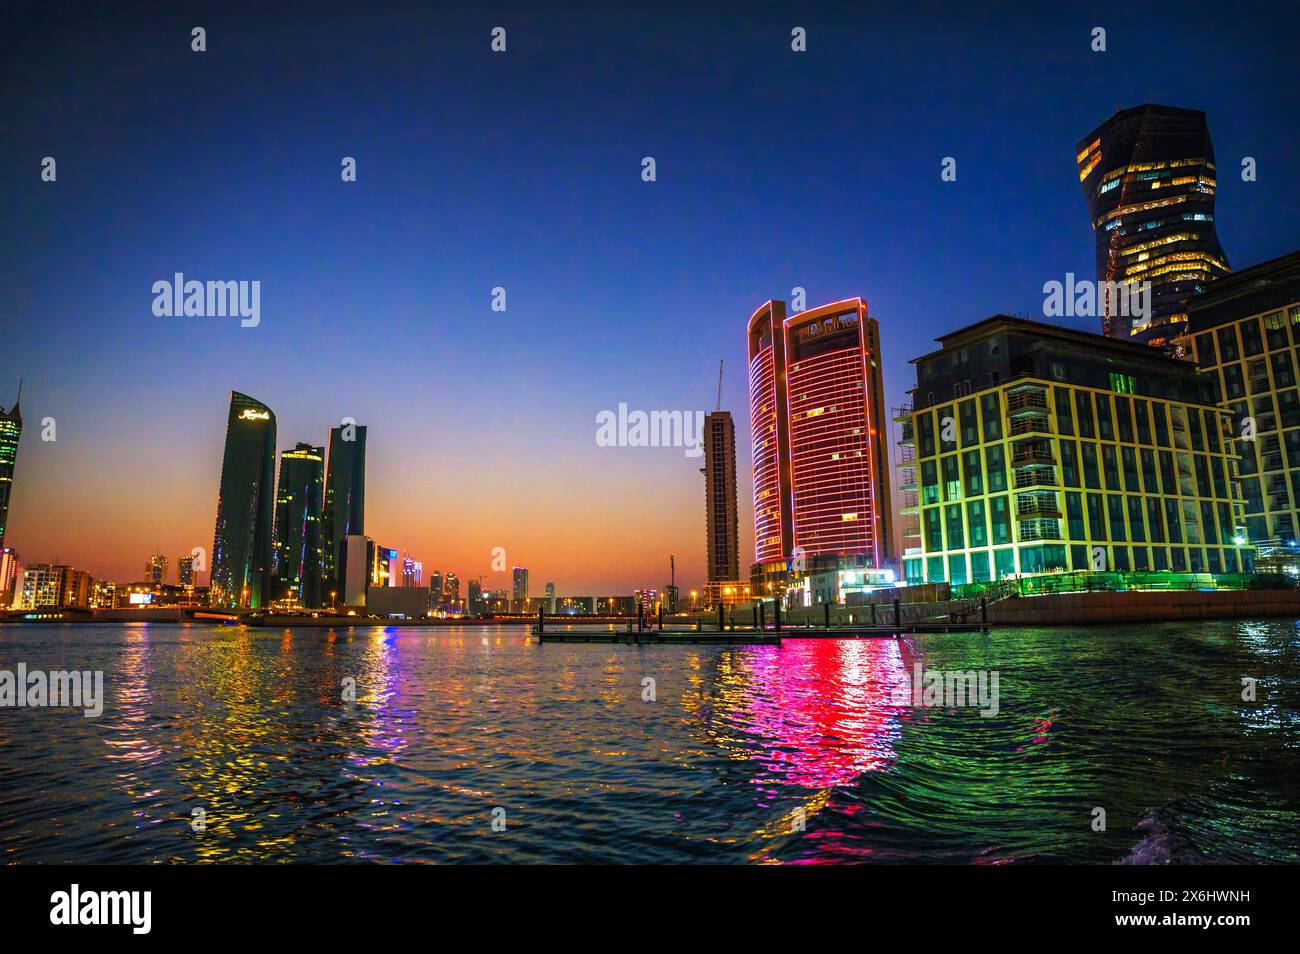 Night view of modern resorts reflecting in water in Bahrain Stock Photo